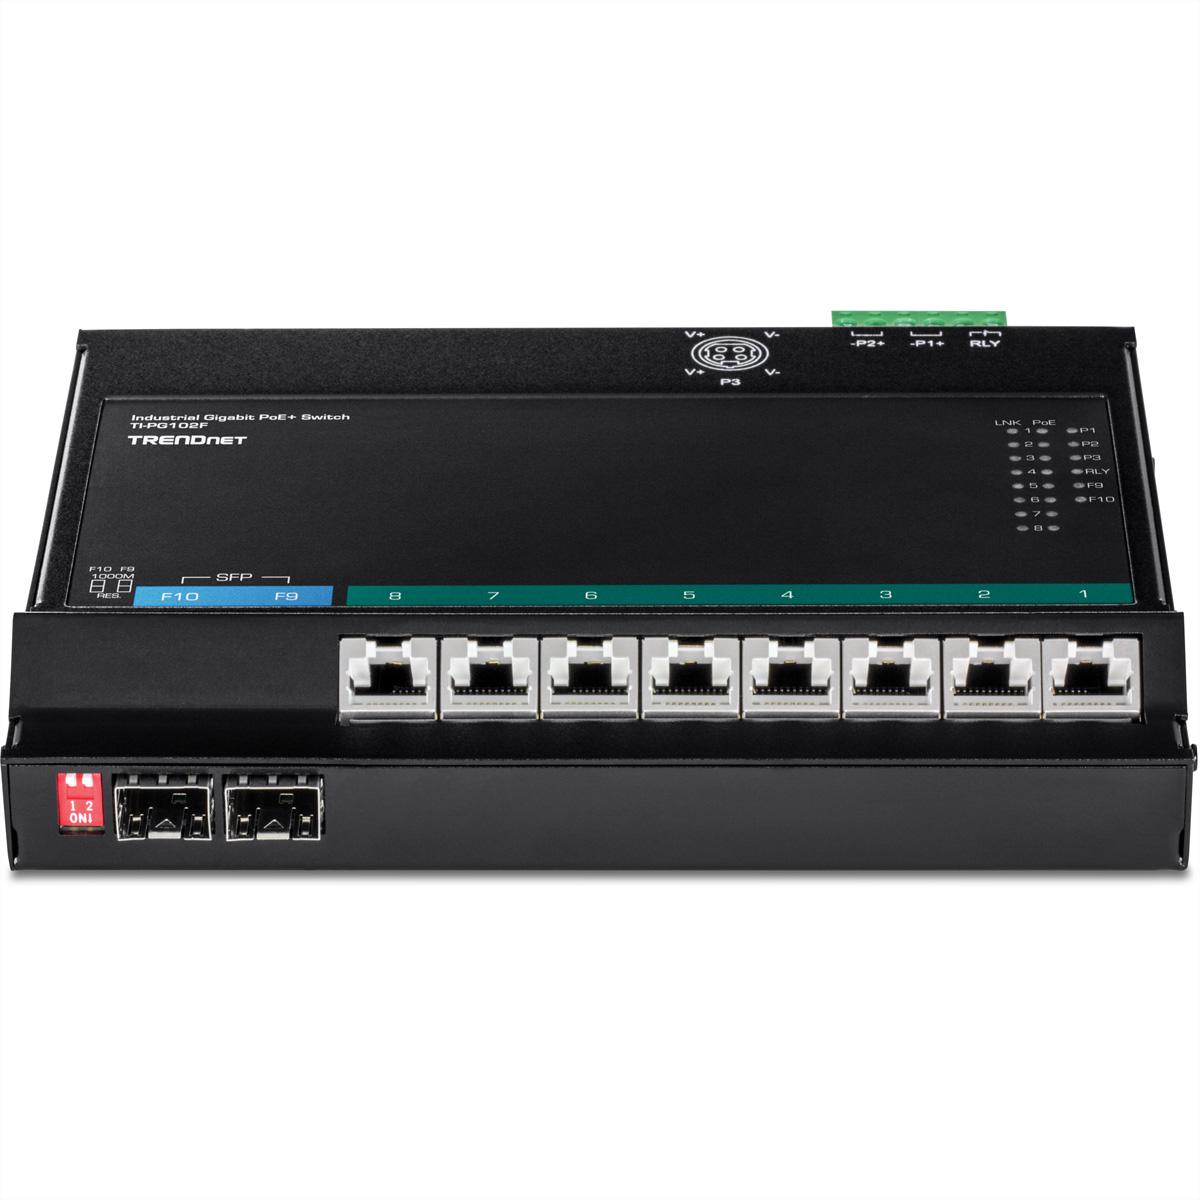 Industrie Industrial Front TRENDNET TI-PG102F Access Wall-Mount Networking PoE+ Switch 10-Port